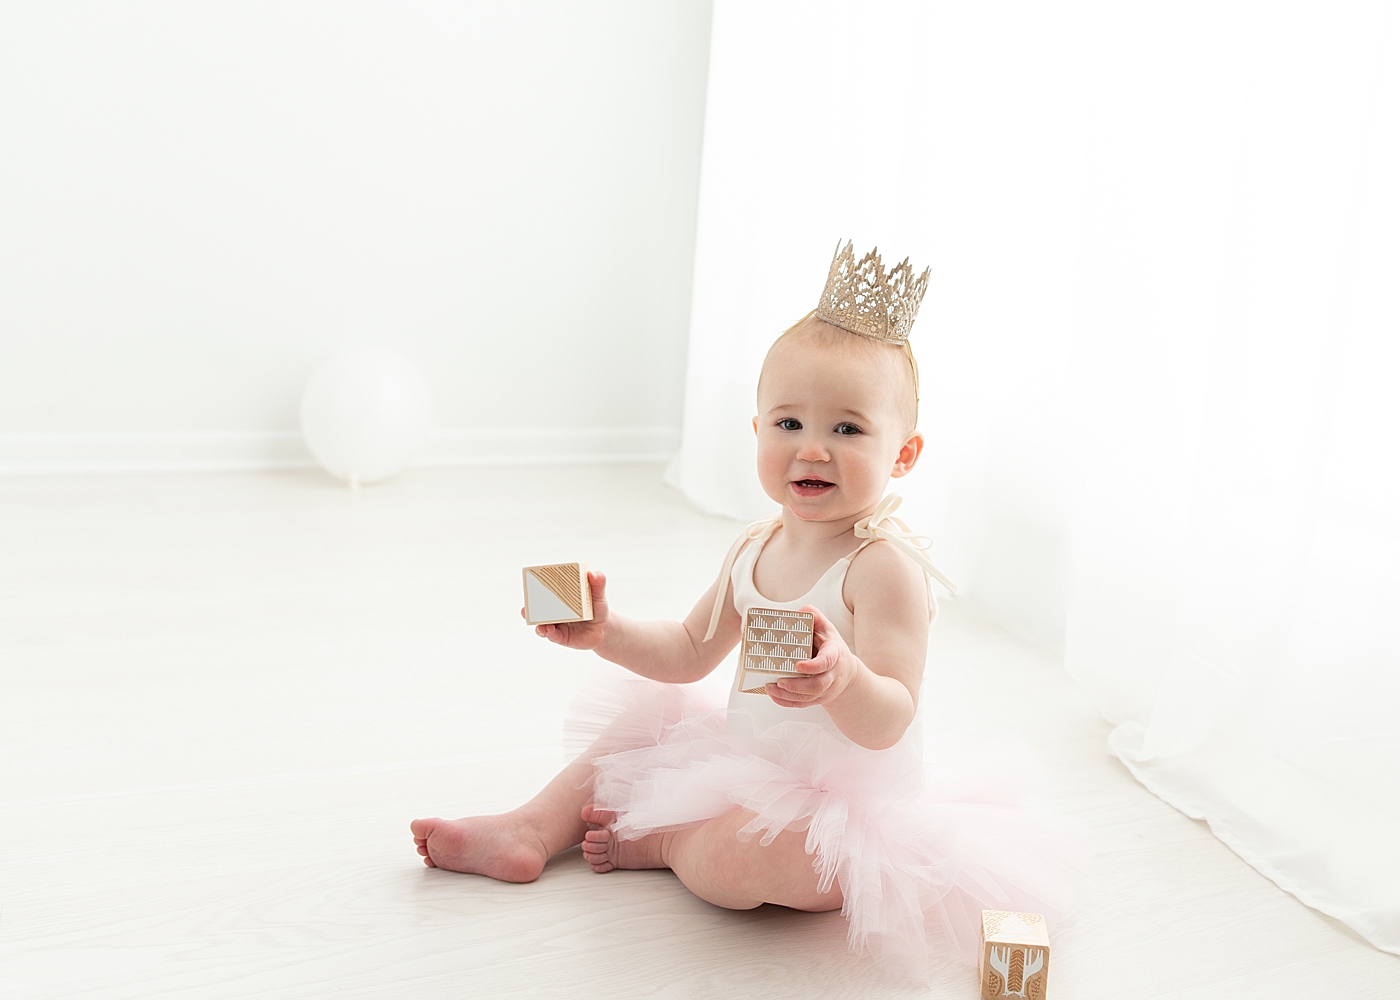 One Year Old Photoshoot in Chagrin Falls Photography Studio. Photos by Rachel Brookes Photography.